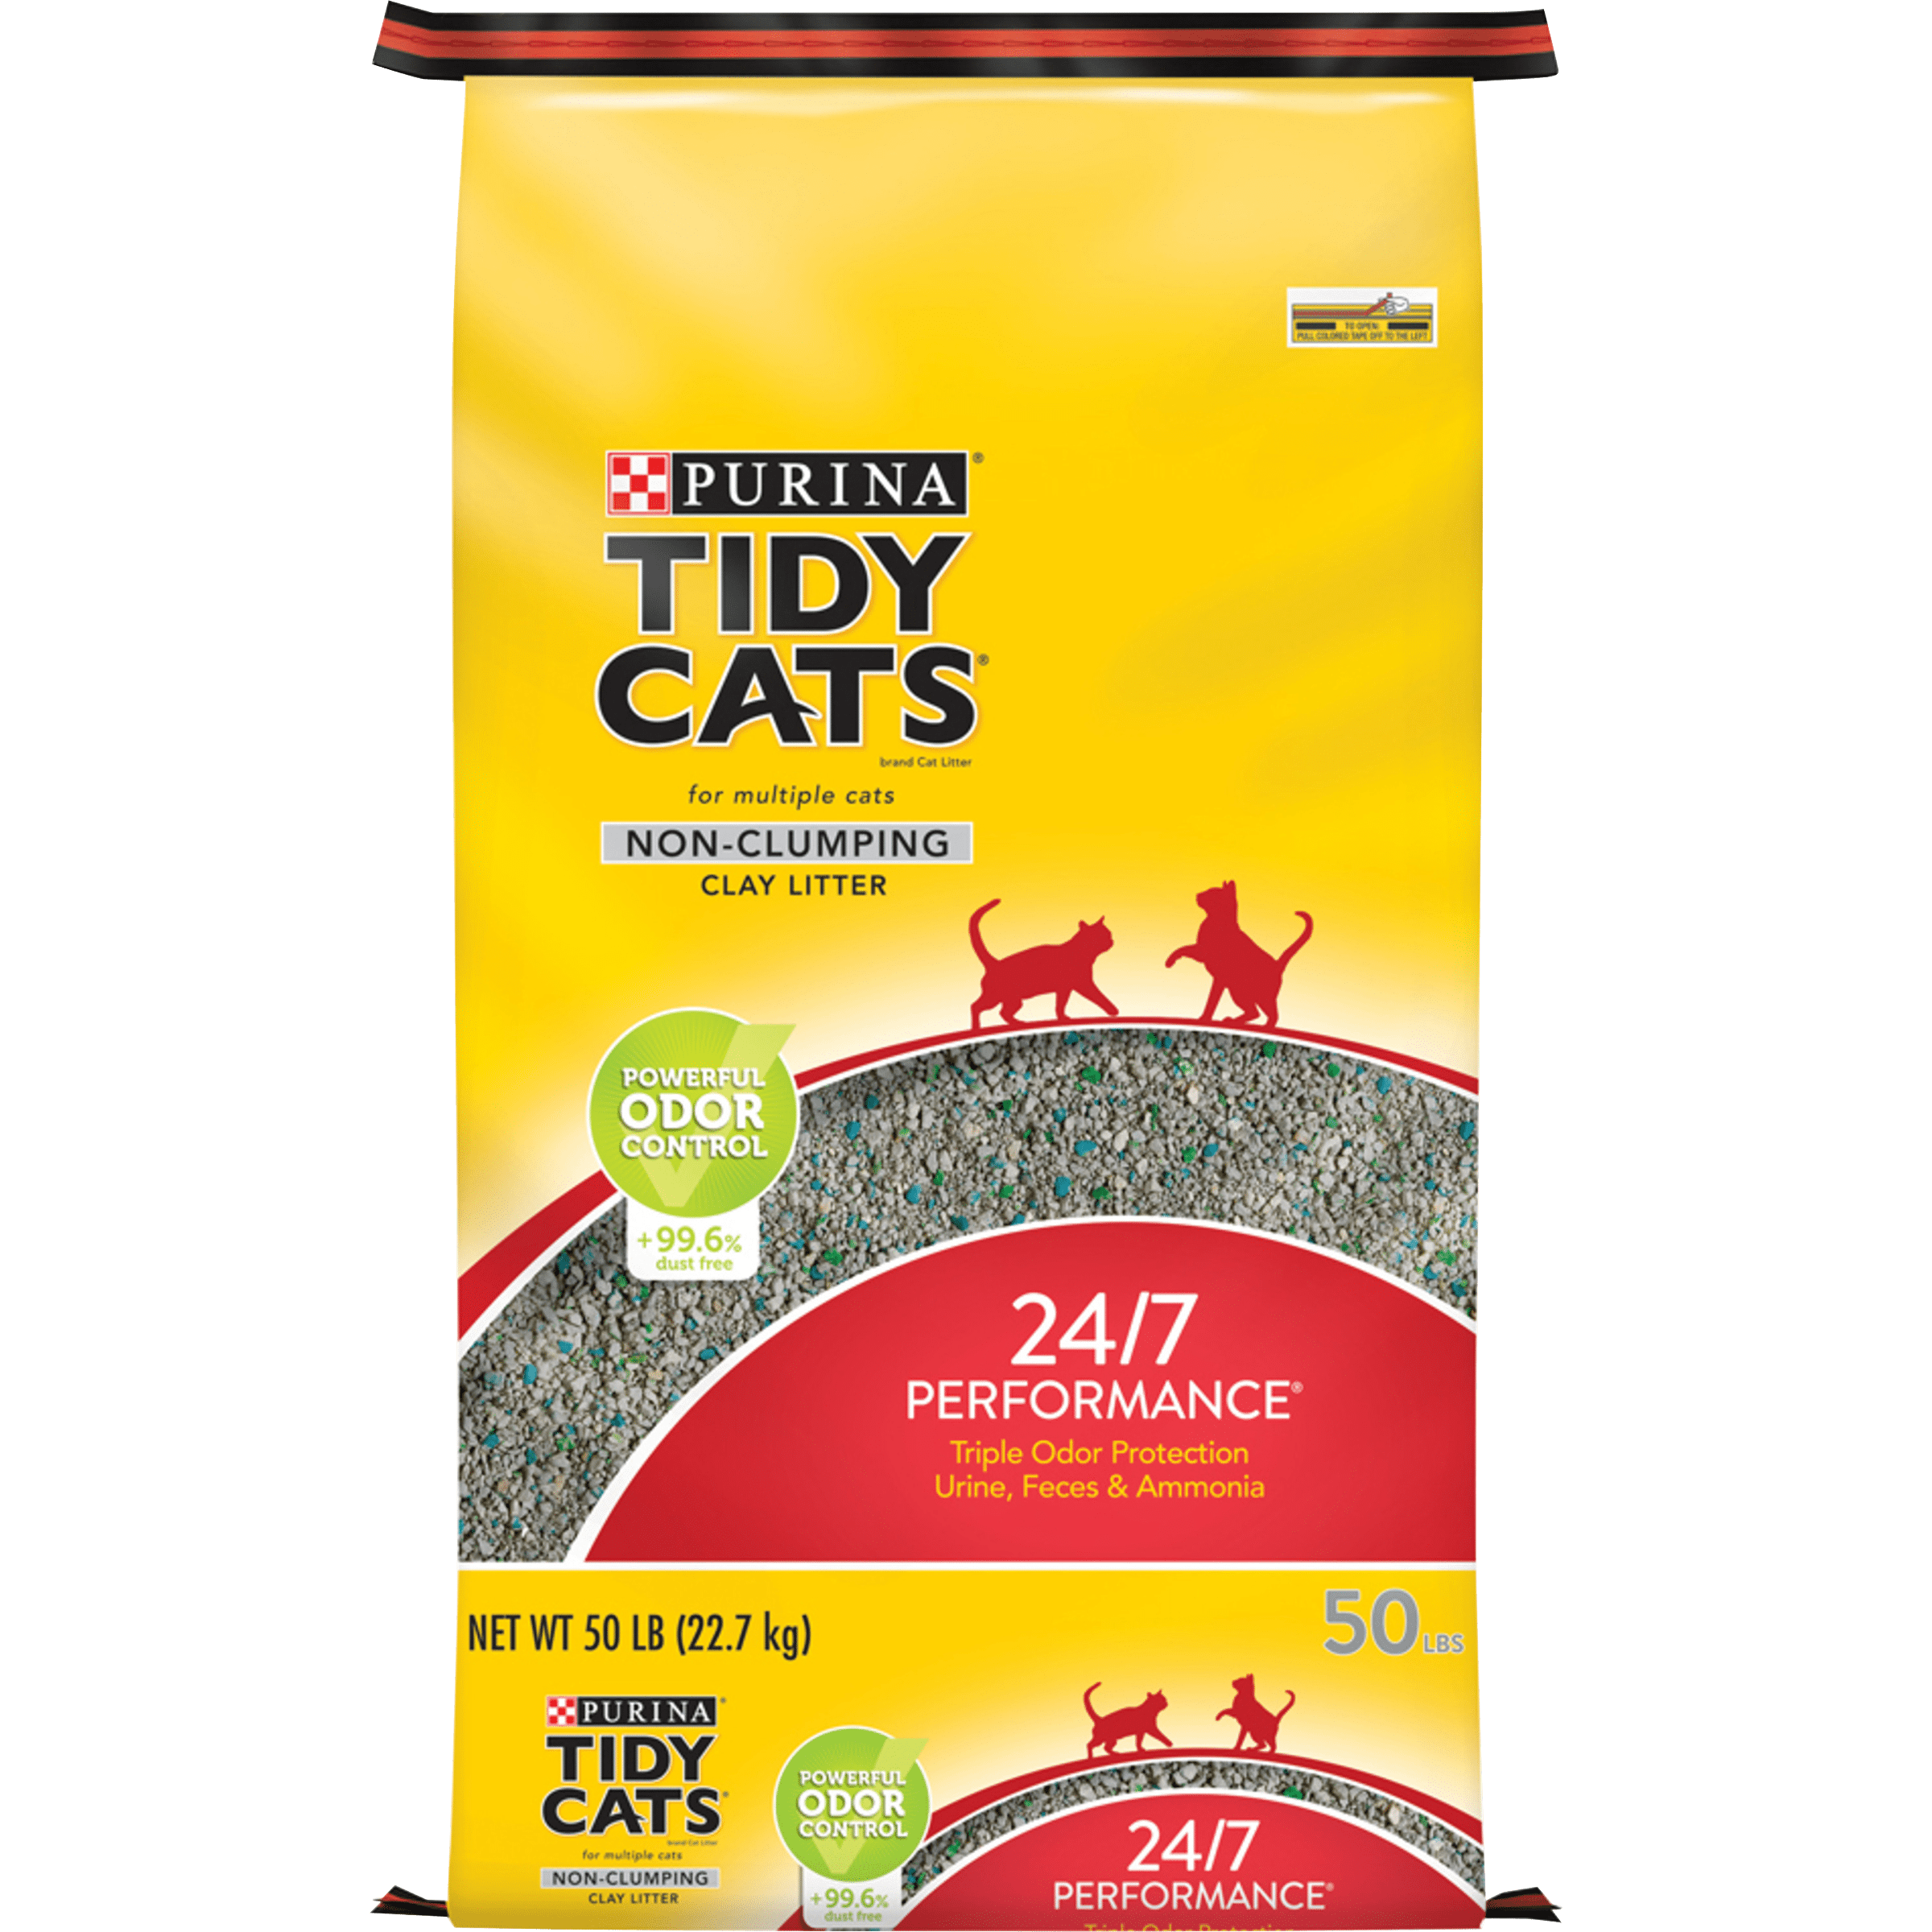 Purina Tidy Cats Non Clumping Cat Litter, 24/7 Performance Multi Cat